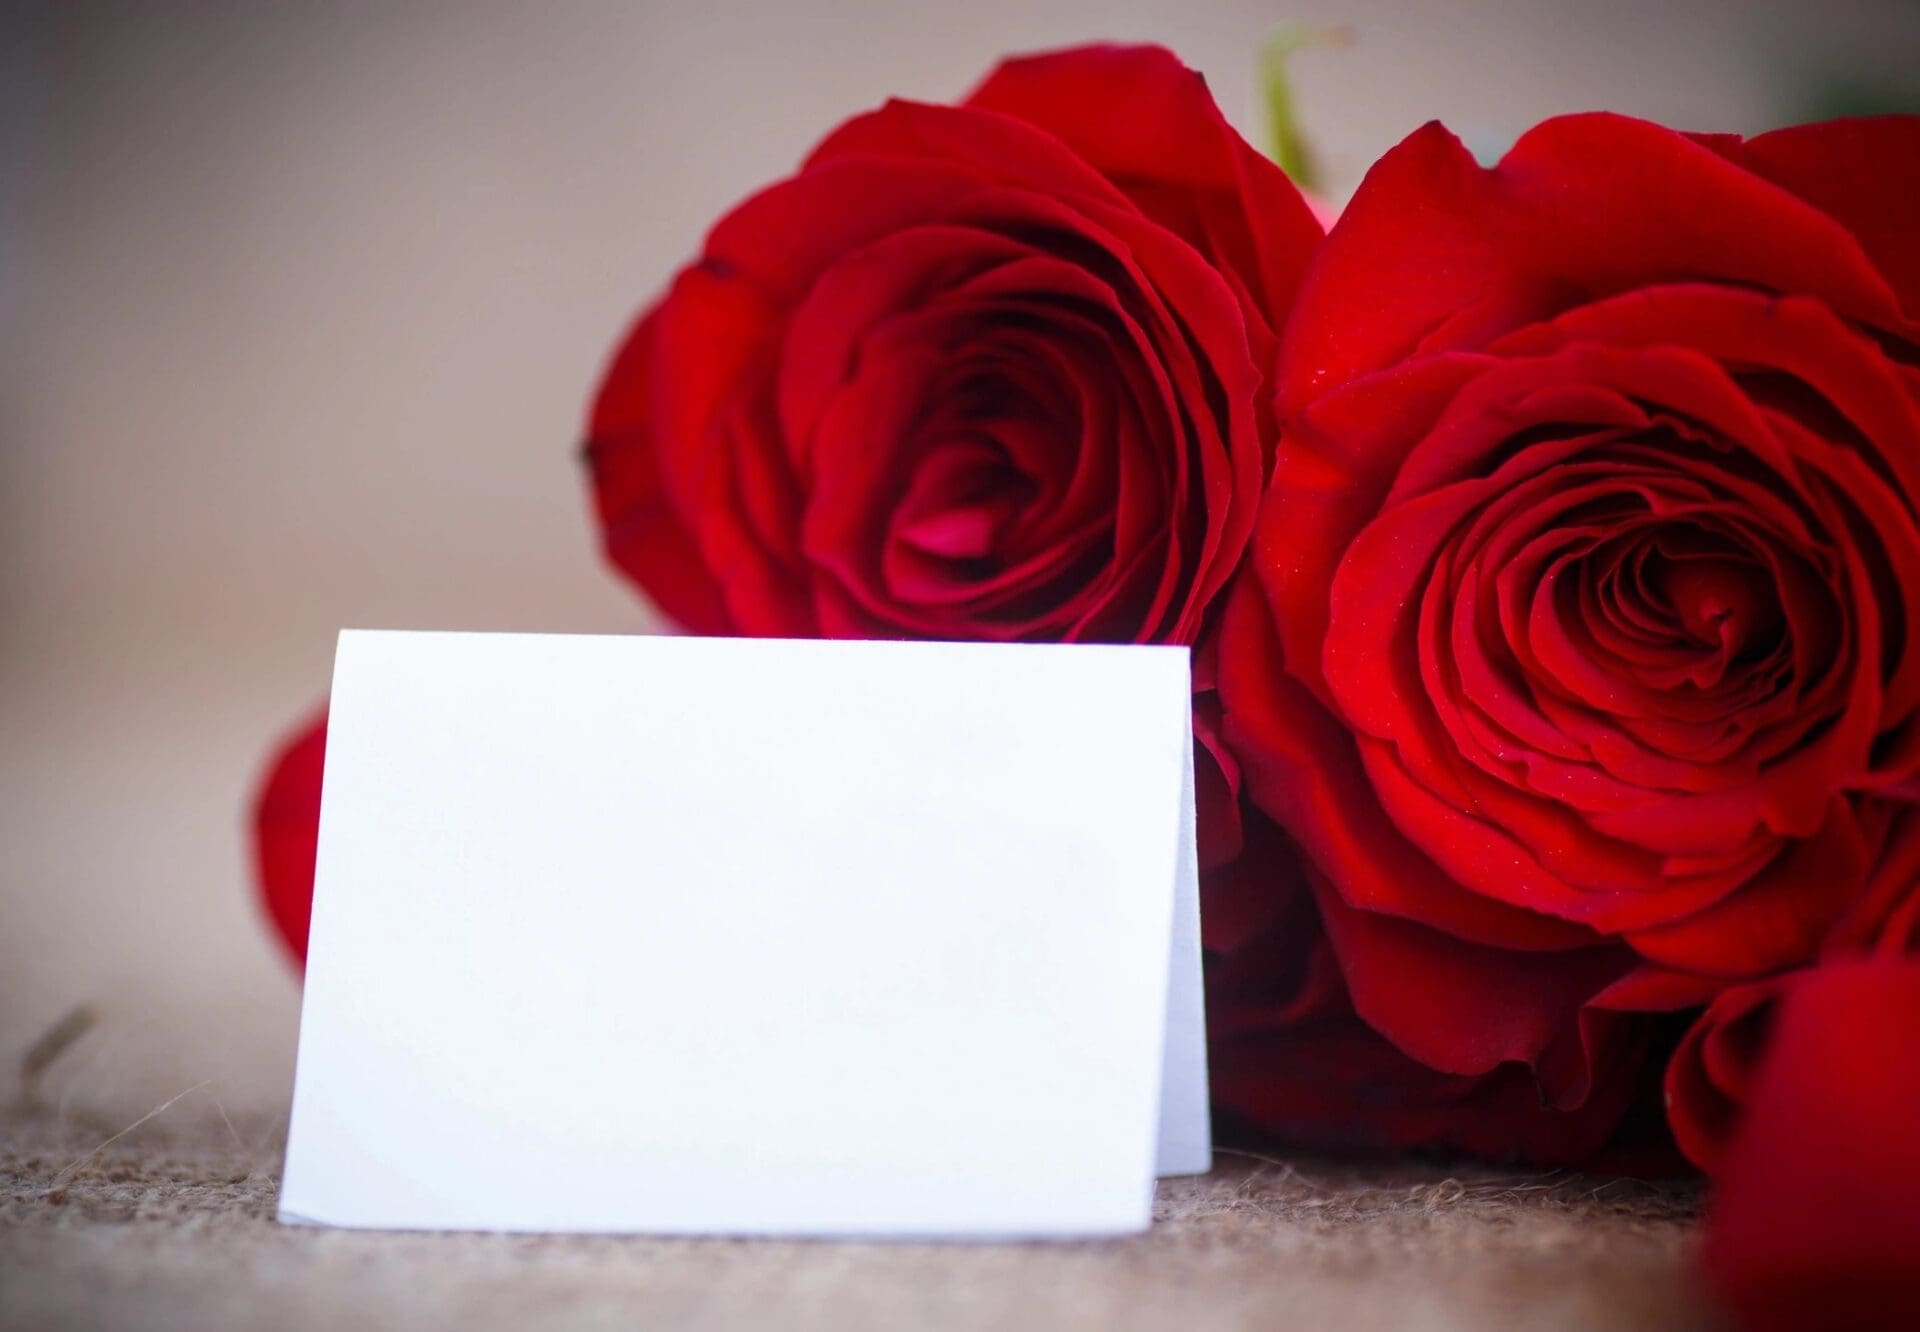 Red roses with a blank card next to them.